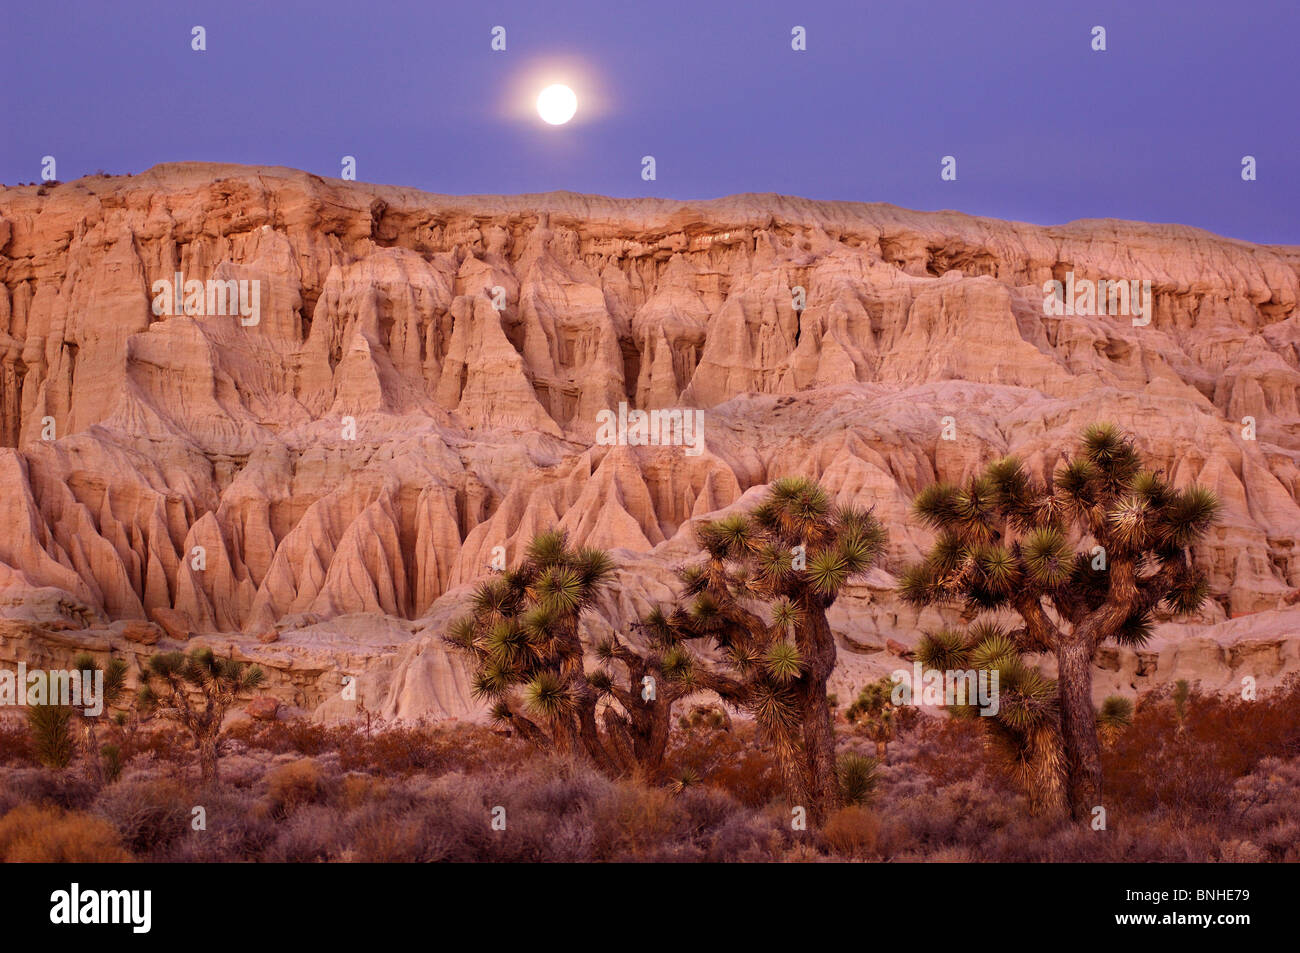 Usa California Badlands At Red Rock Canyon State Park Dawn Morning Landscape Scenery Scenic Nature Moon Joshua Trees Desert Stock Photo